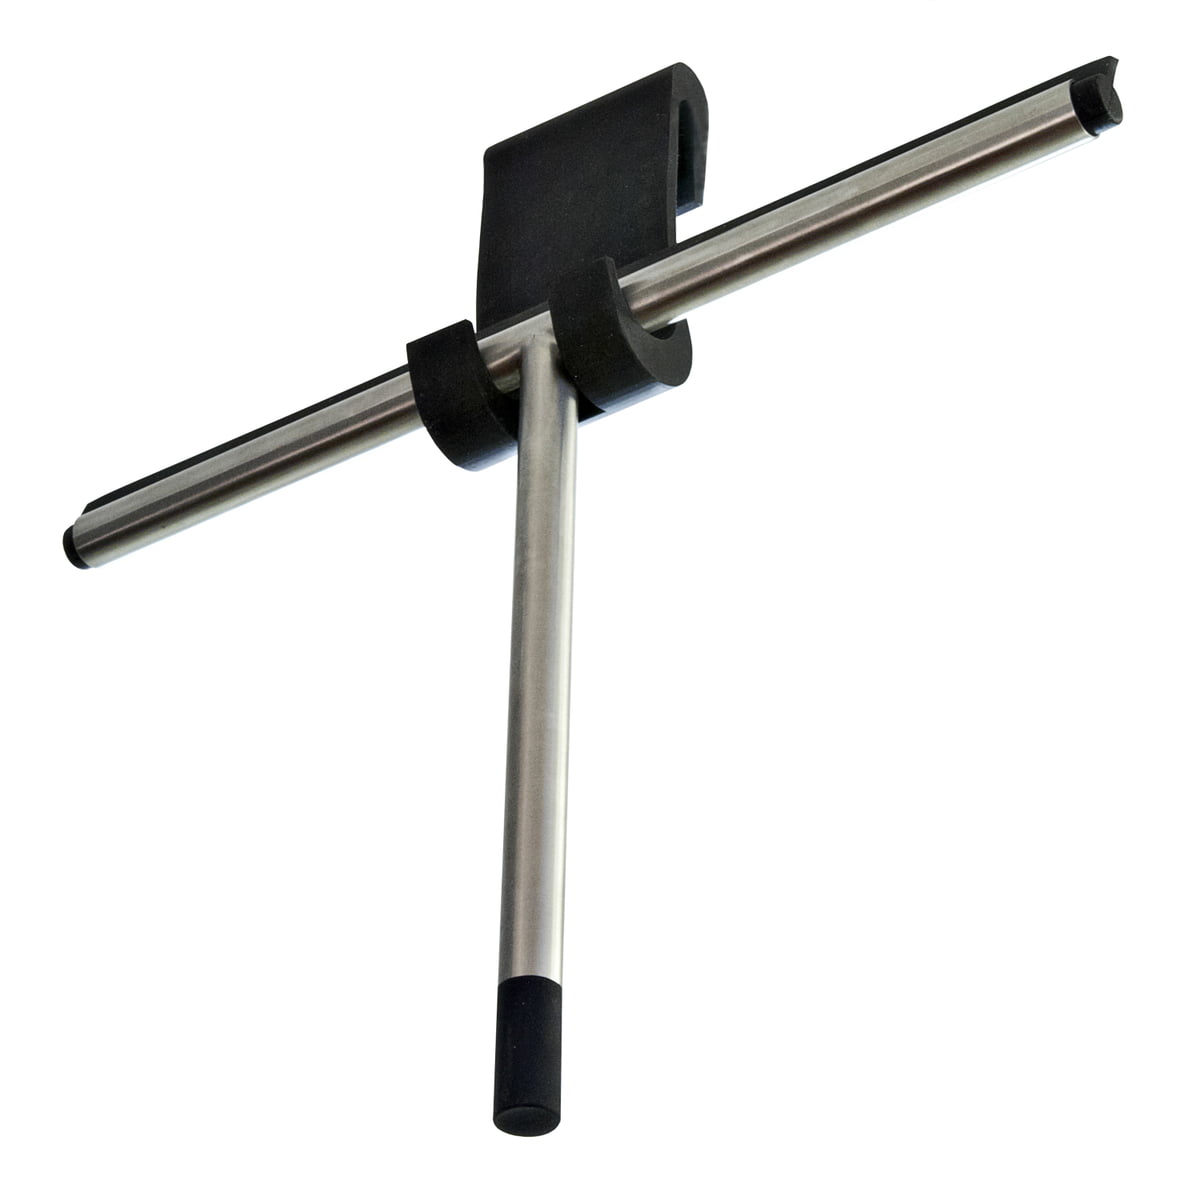 Matte Black Shower Squeegee Review